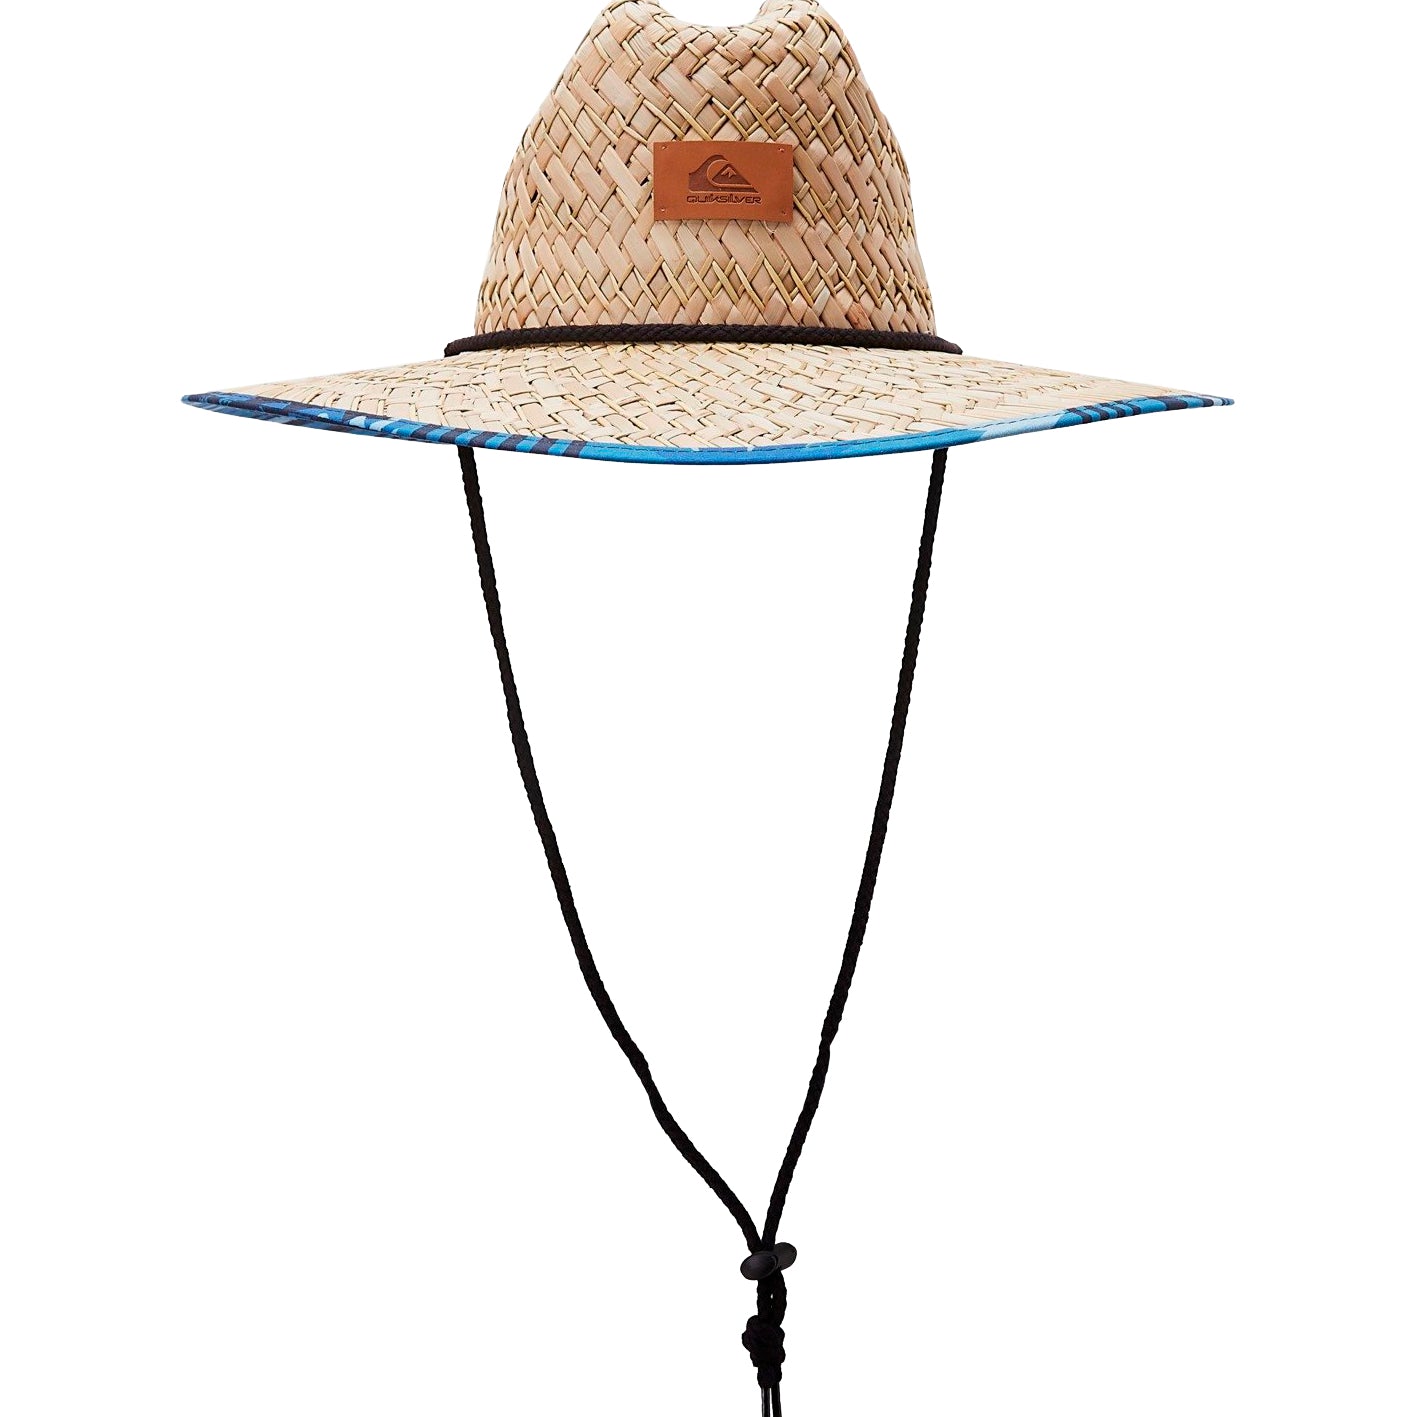 Quiksilver Outsider Straw Lifeguard Hat BYH6 S/M